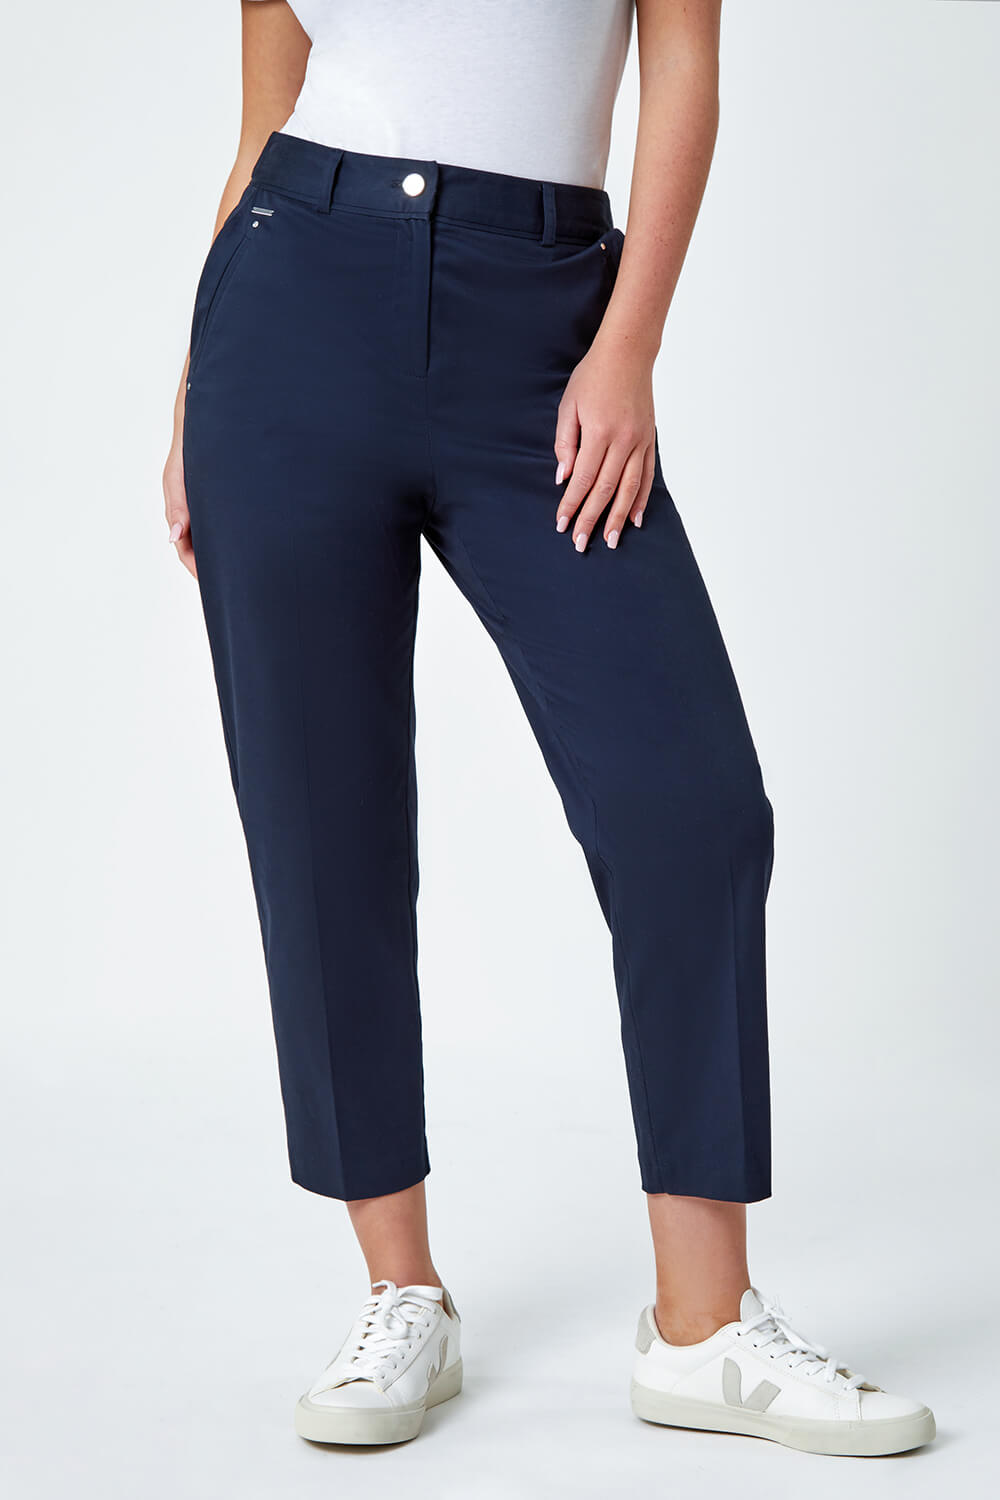 Navy  Petite Cotton Blend Stretch Trousers, Image 4 of 5